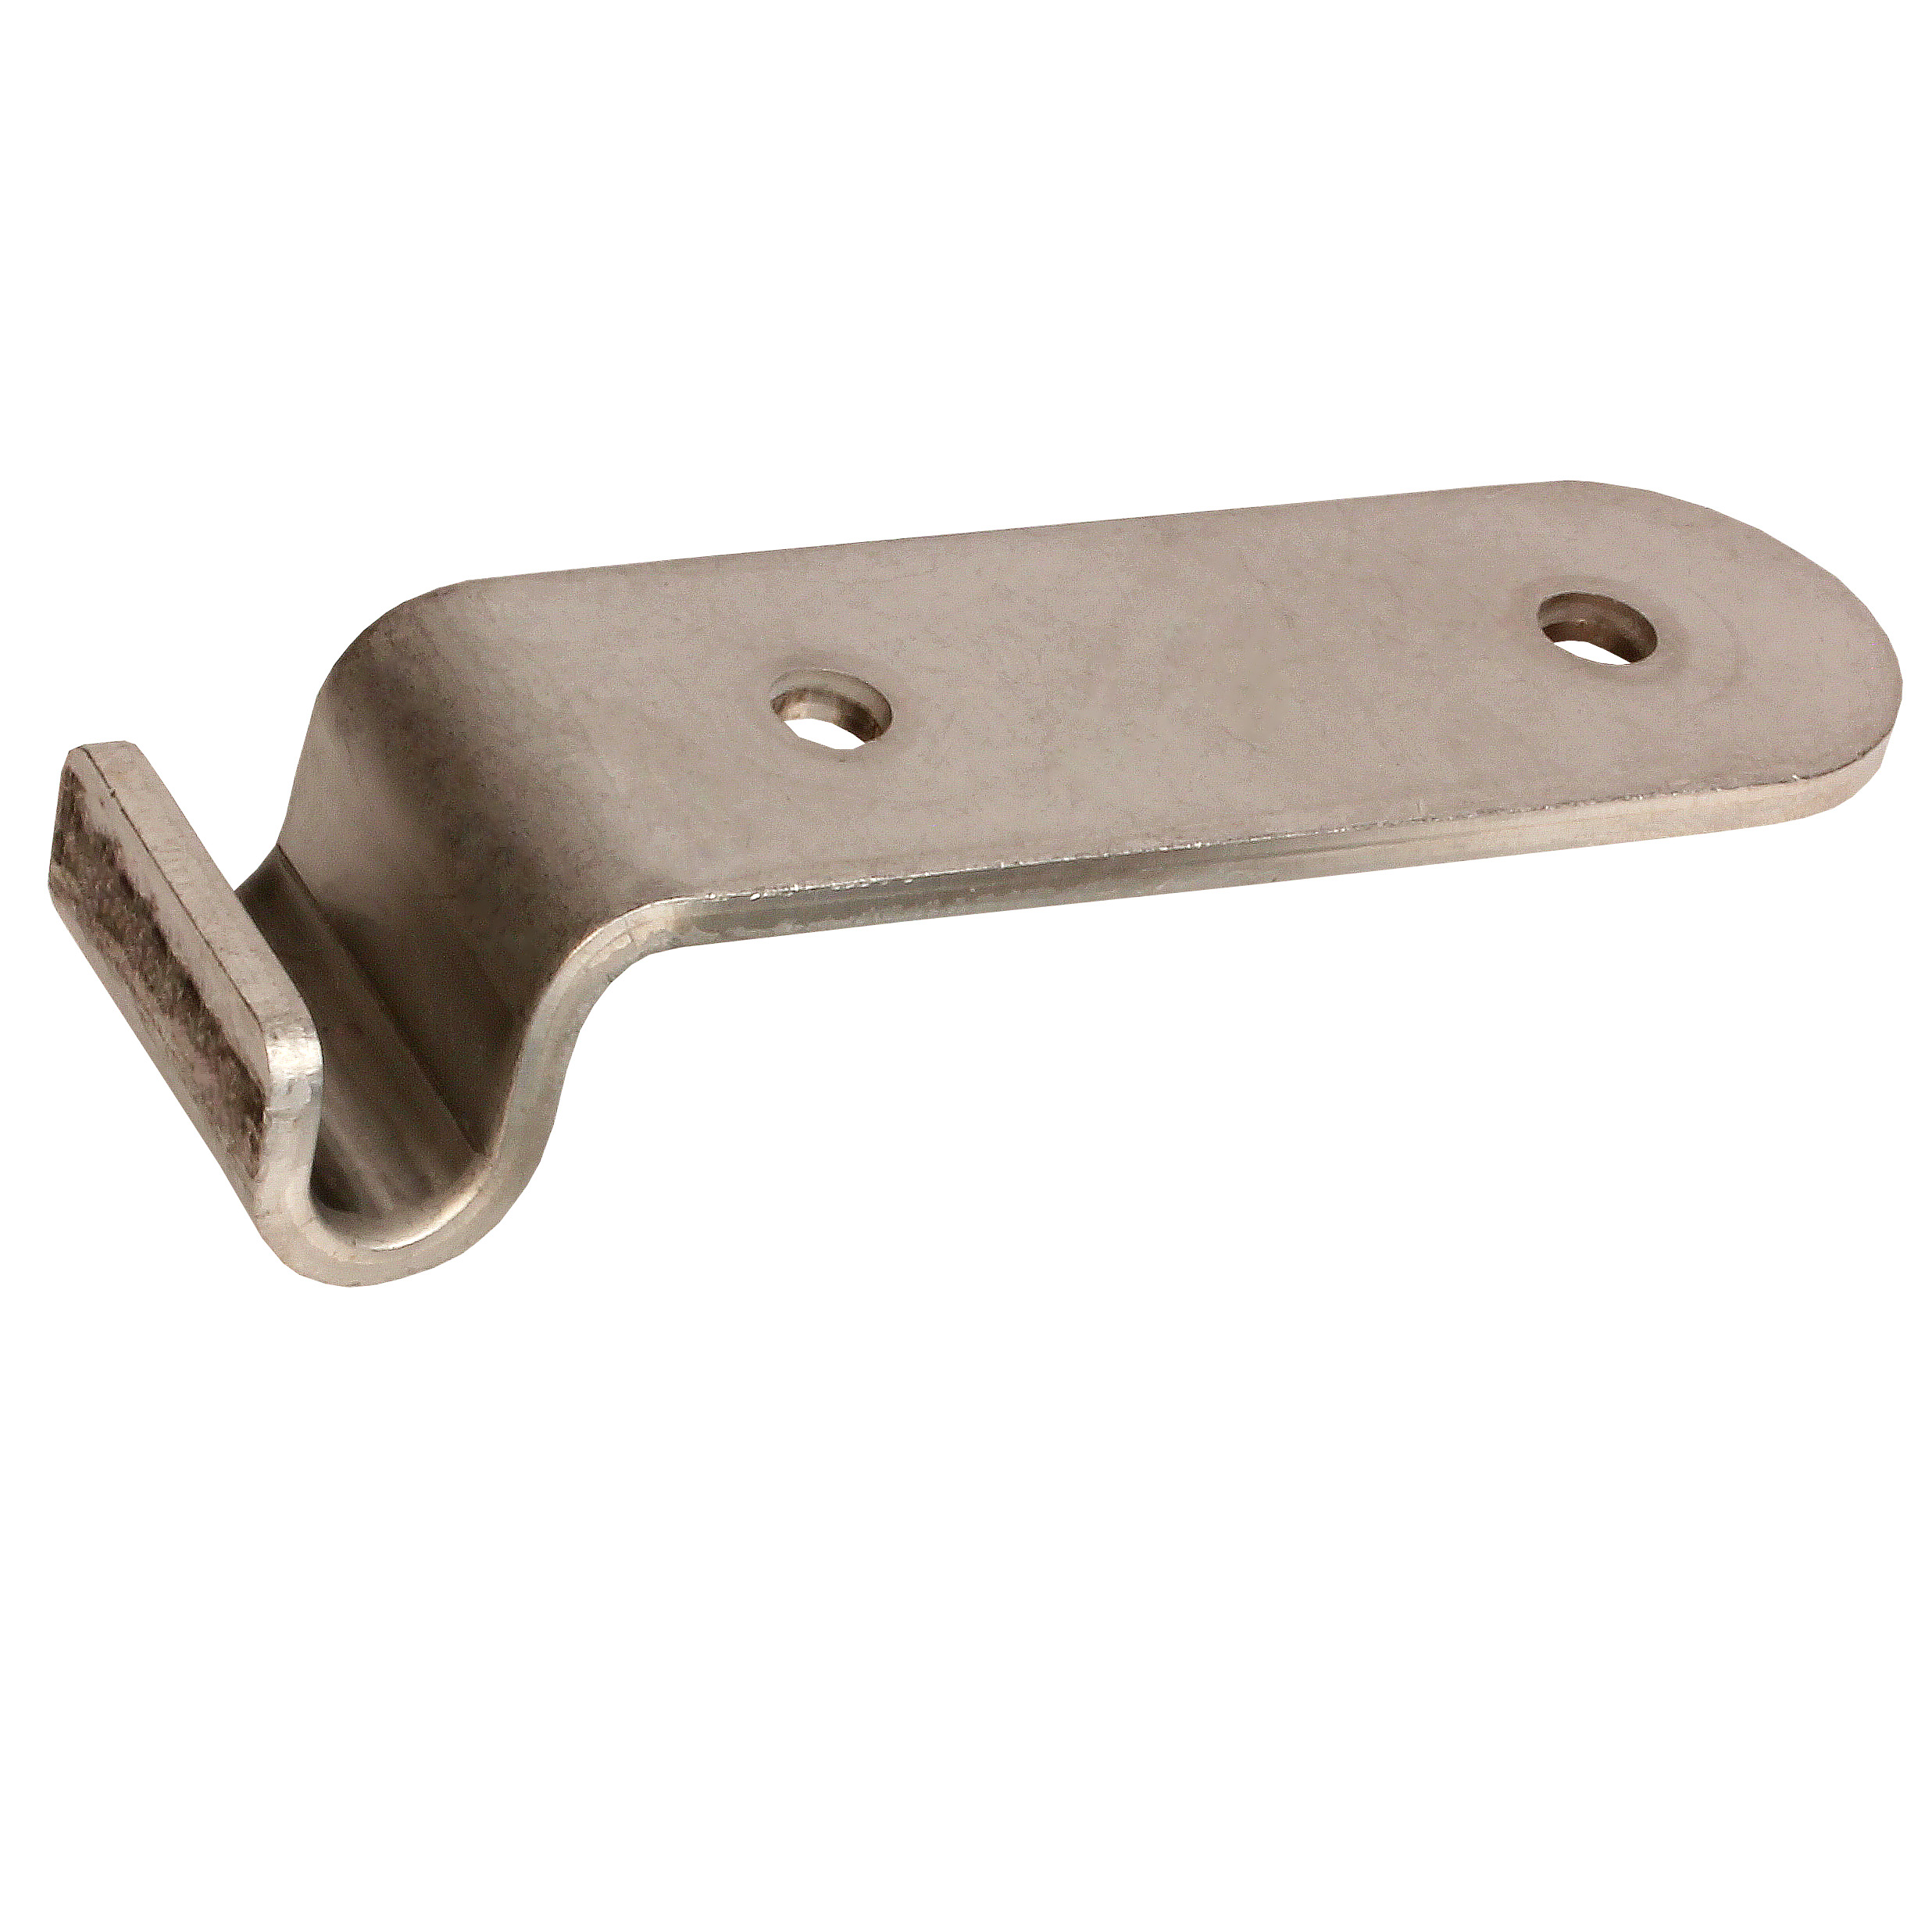 Strike for toggle latch - 25.5mm - Stainless steel - Right angled